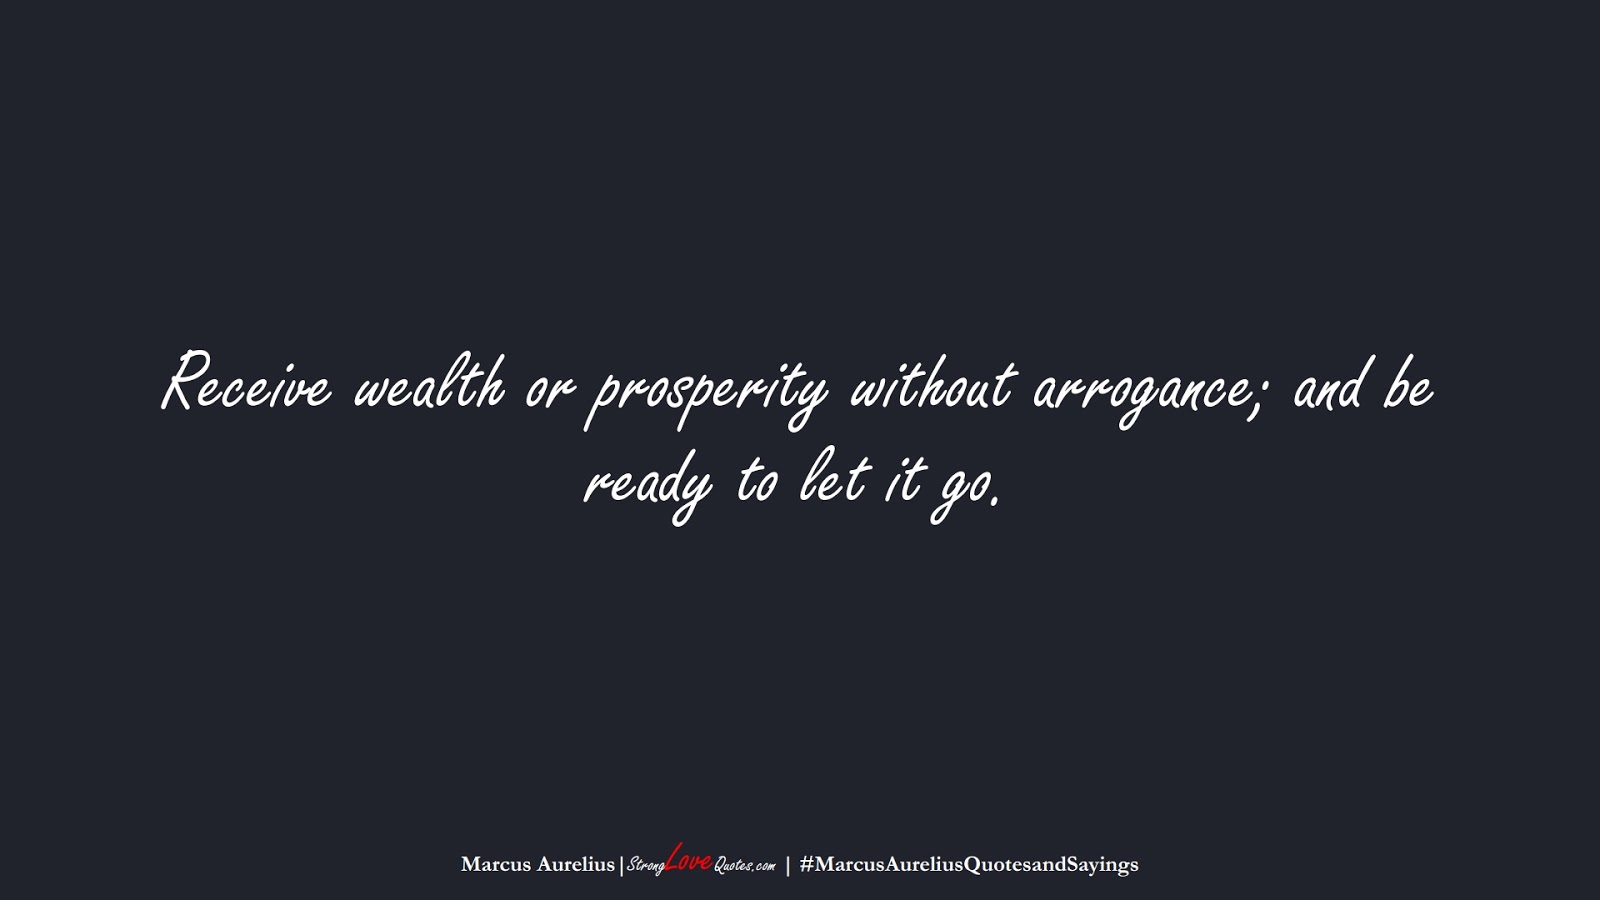 Receive wealth or prosperity without arrogance; and be ready to let it go. (Marcus Aurelius);  #MarcusAureliusQuotesandSayings